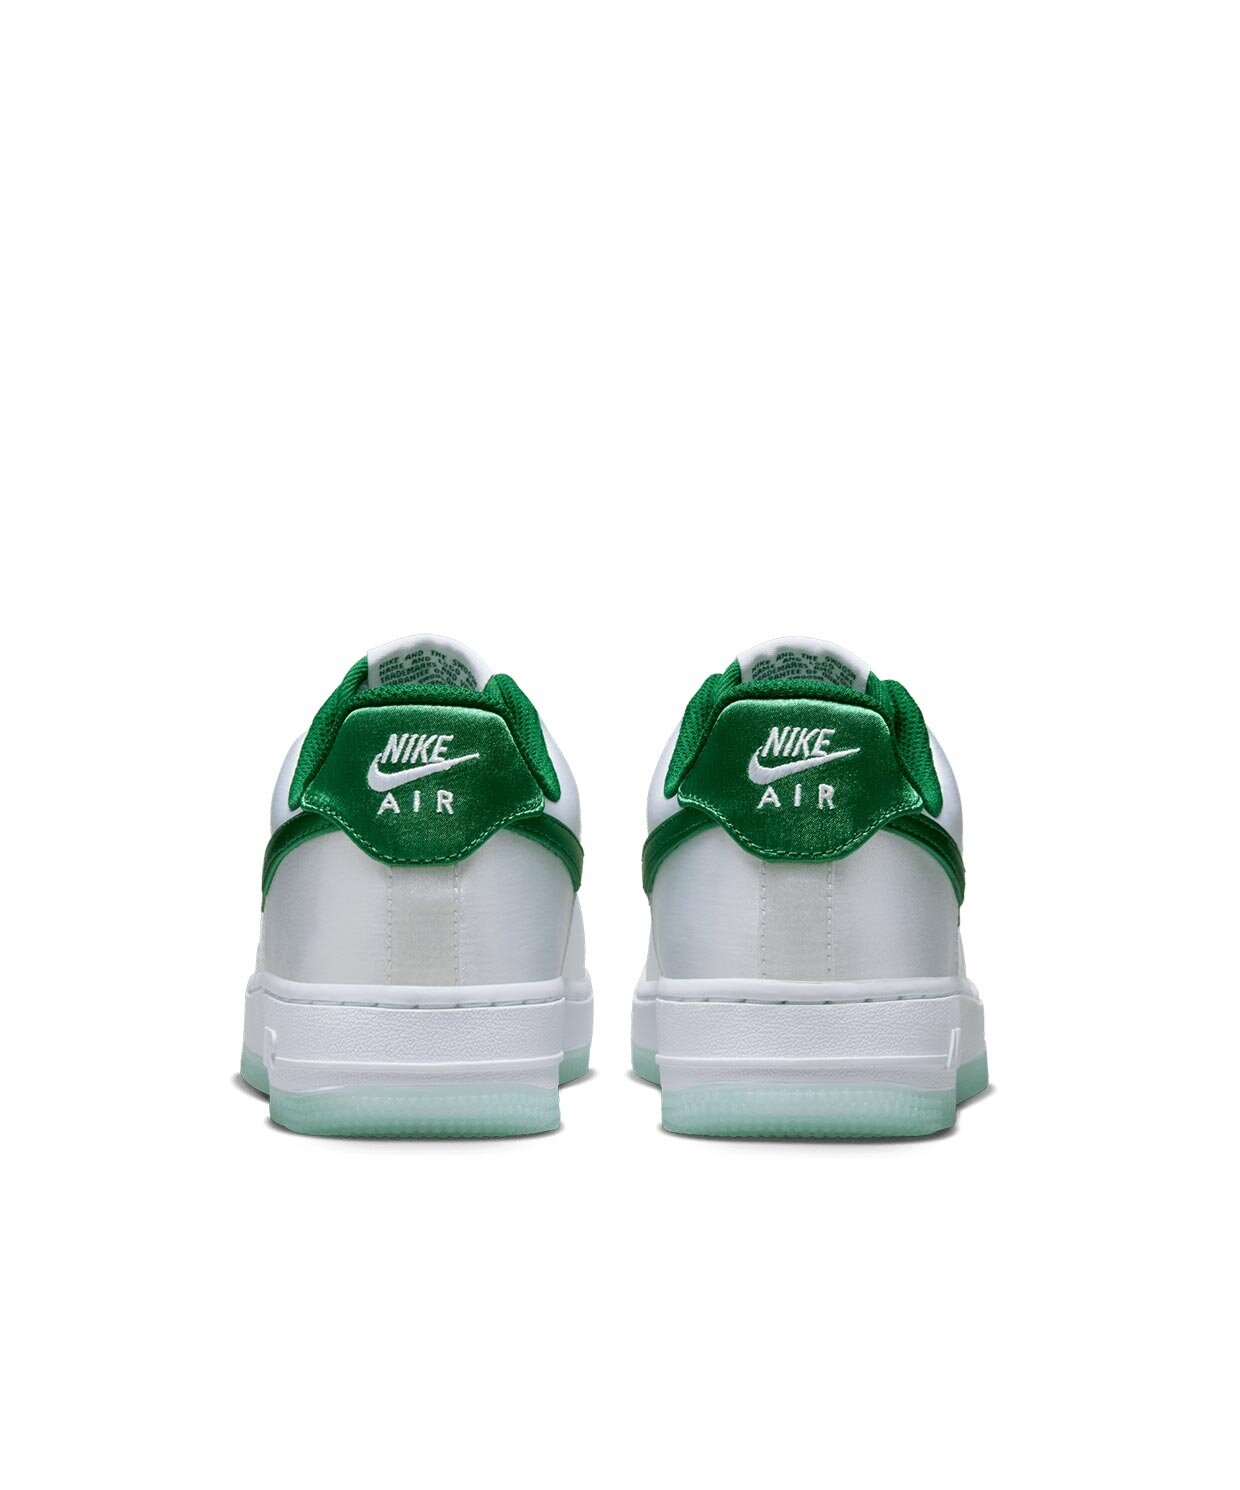 resm Nike W Air Force 1 '07 Ess Snkr